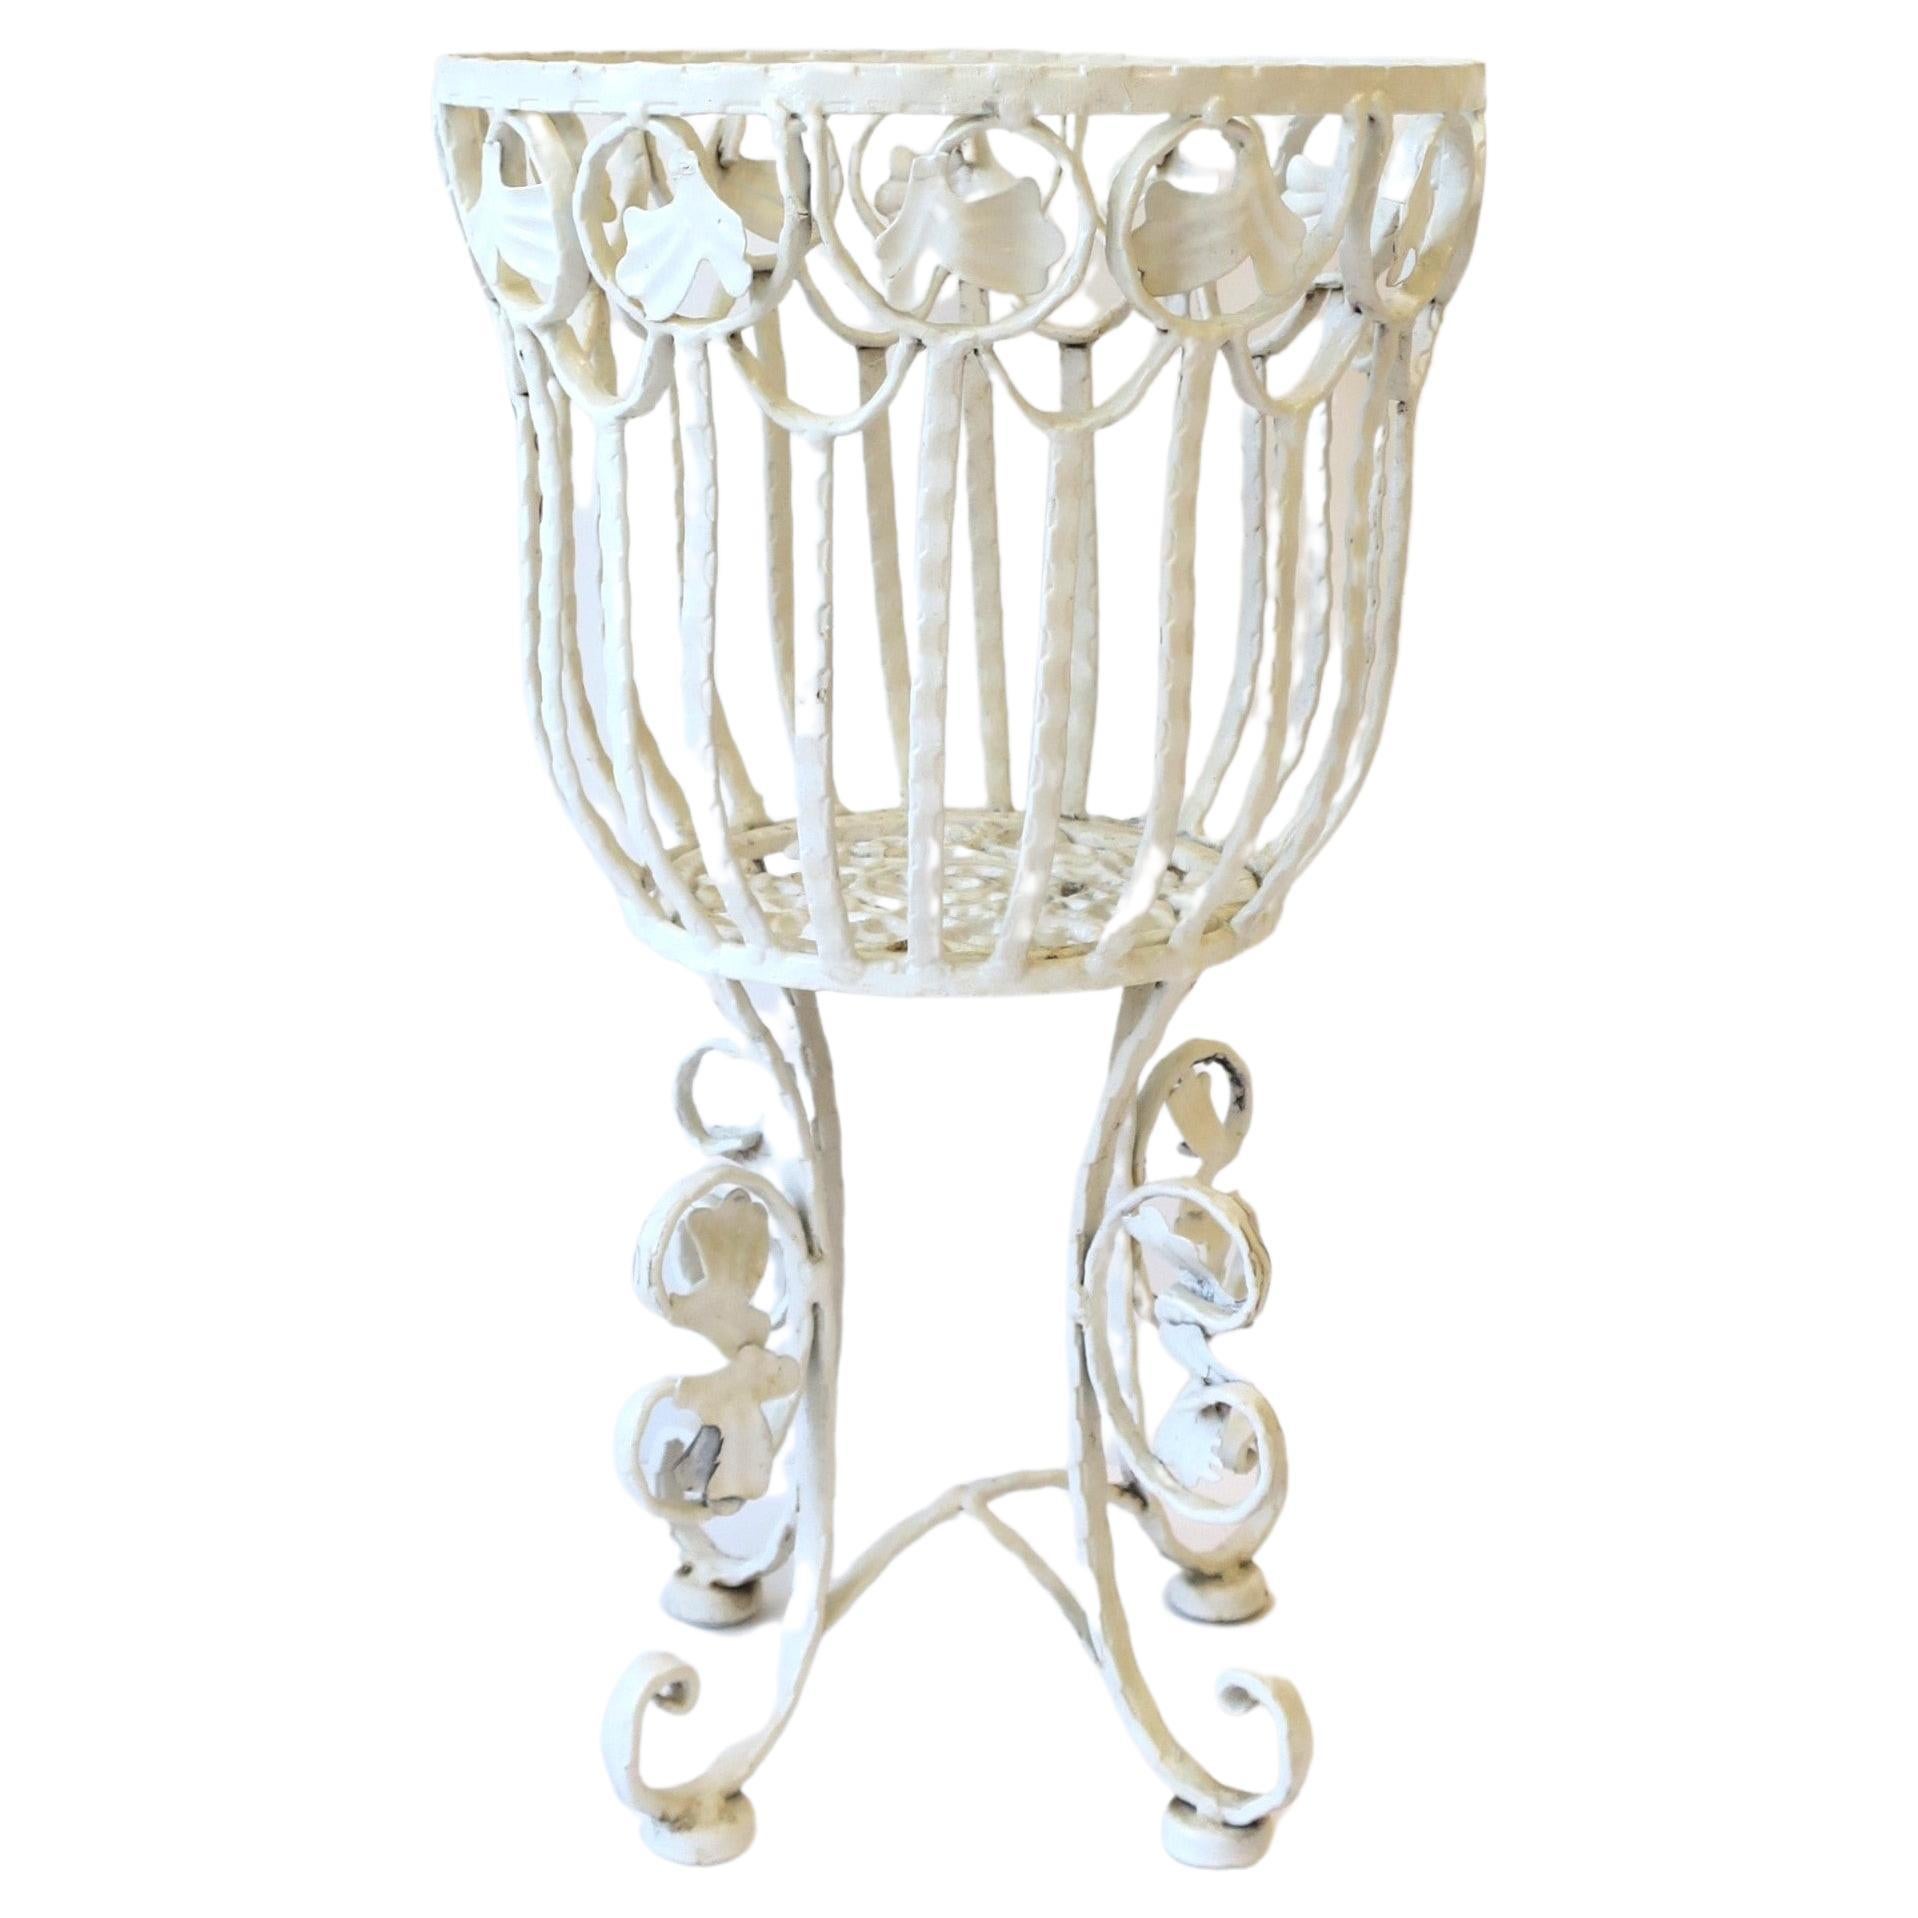 Outdoor Garden or Patio White Cachepot Flower or Plant Pot Holder Stand